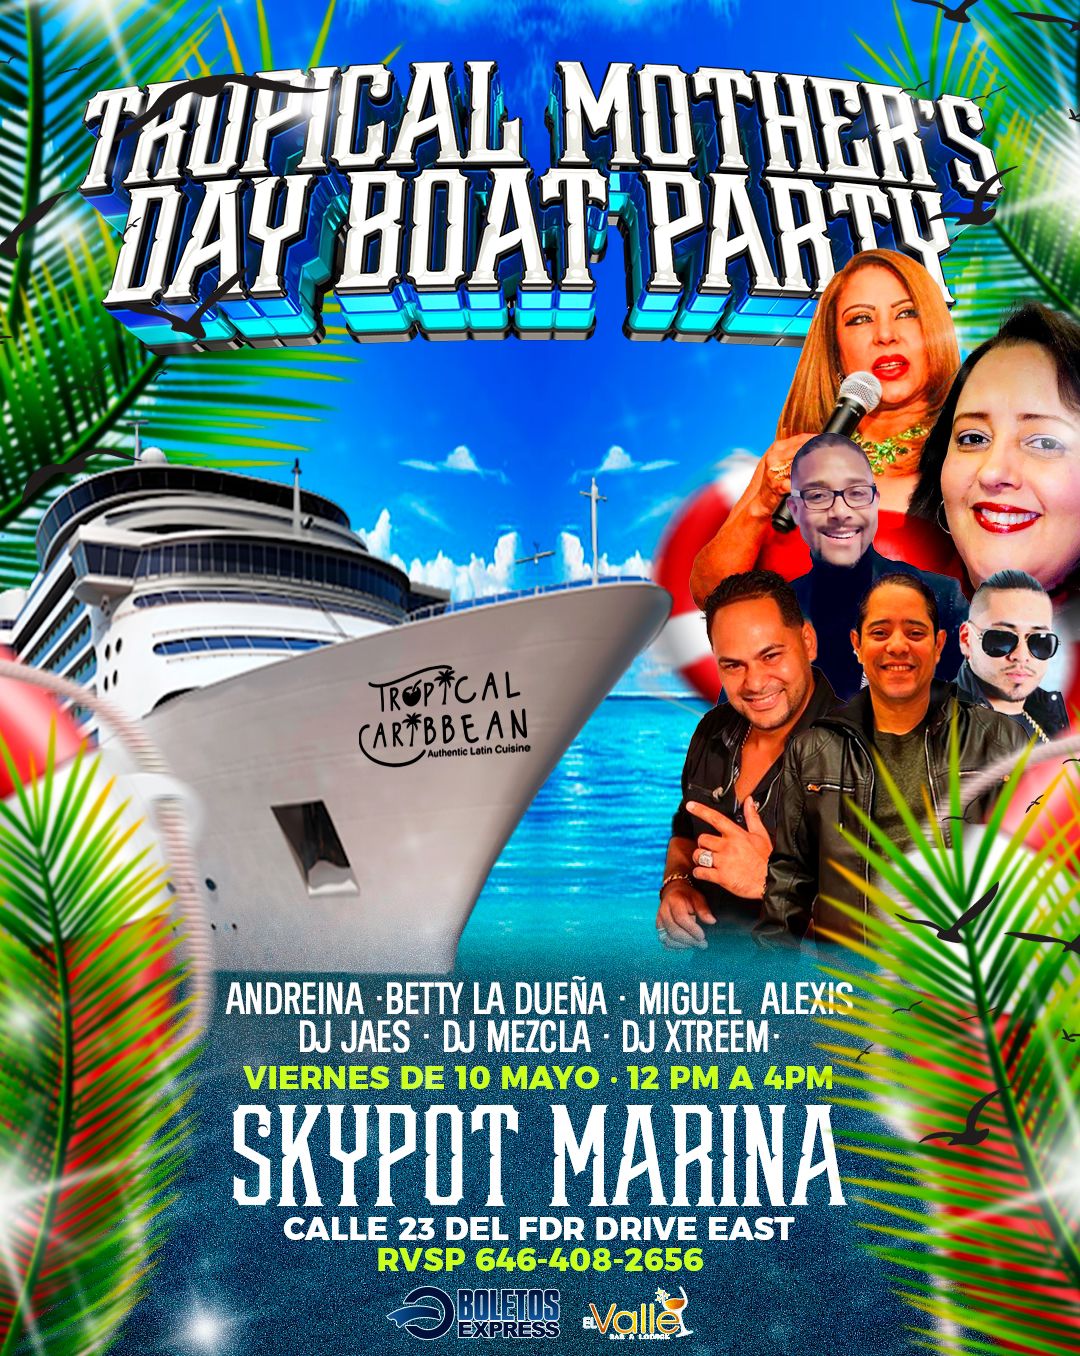 TROPICAL MOTHER'S DAY BOAT PARTY